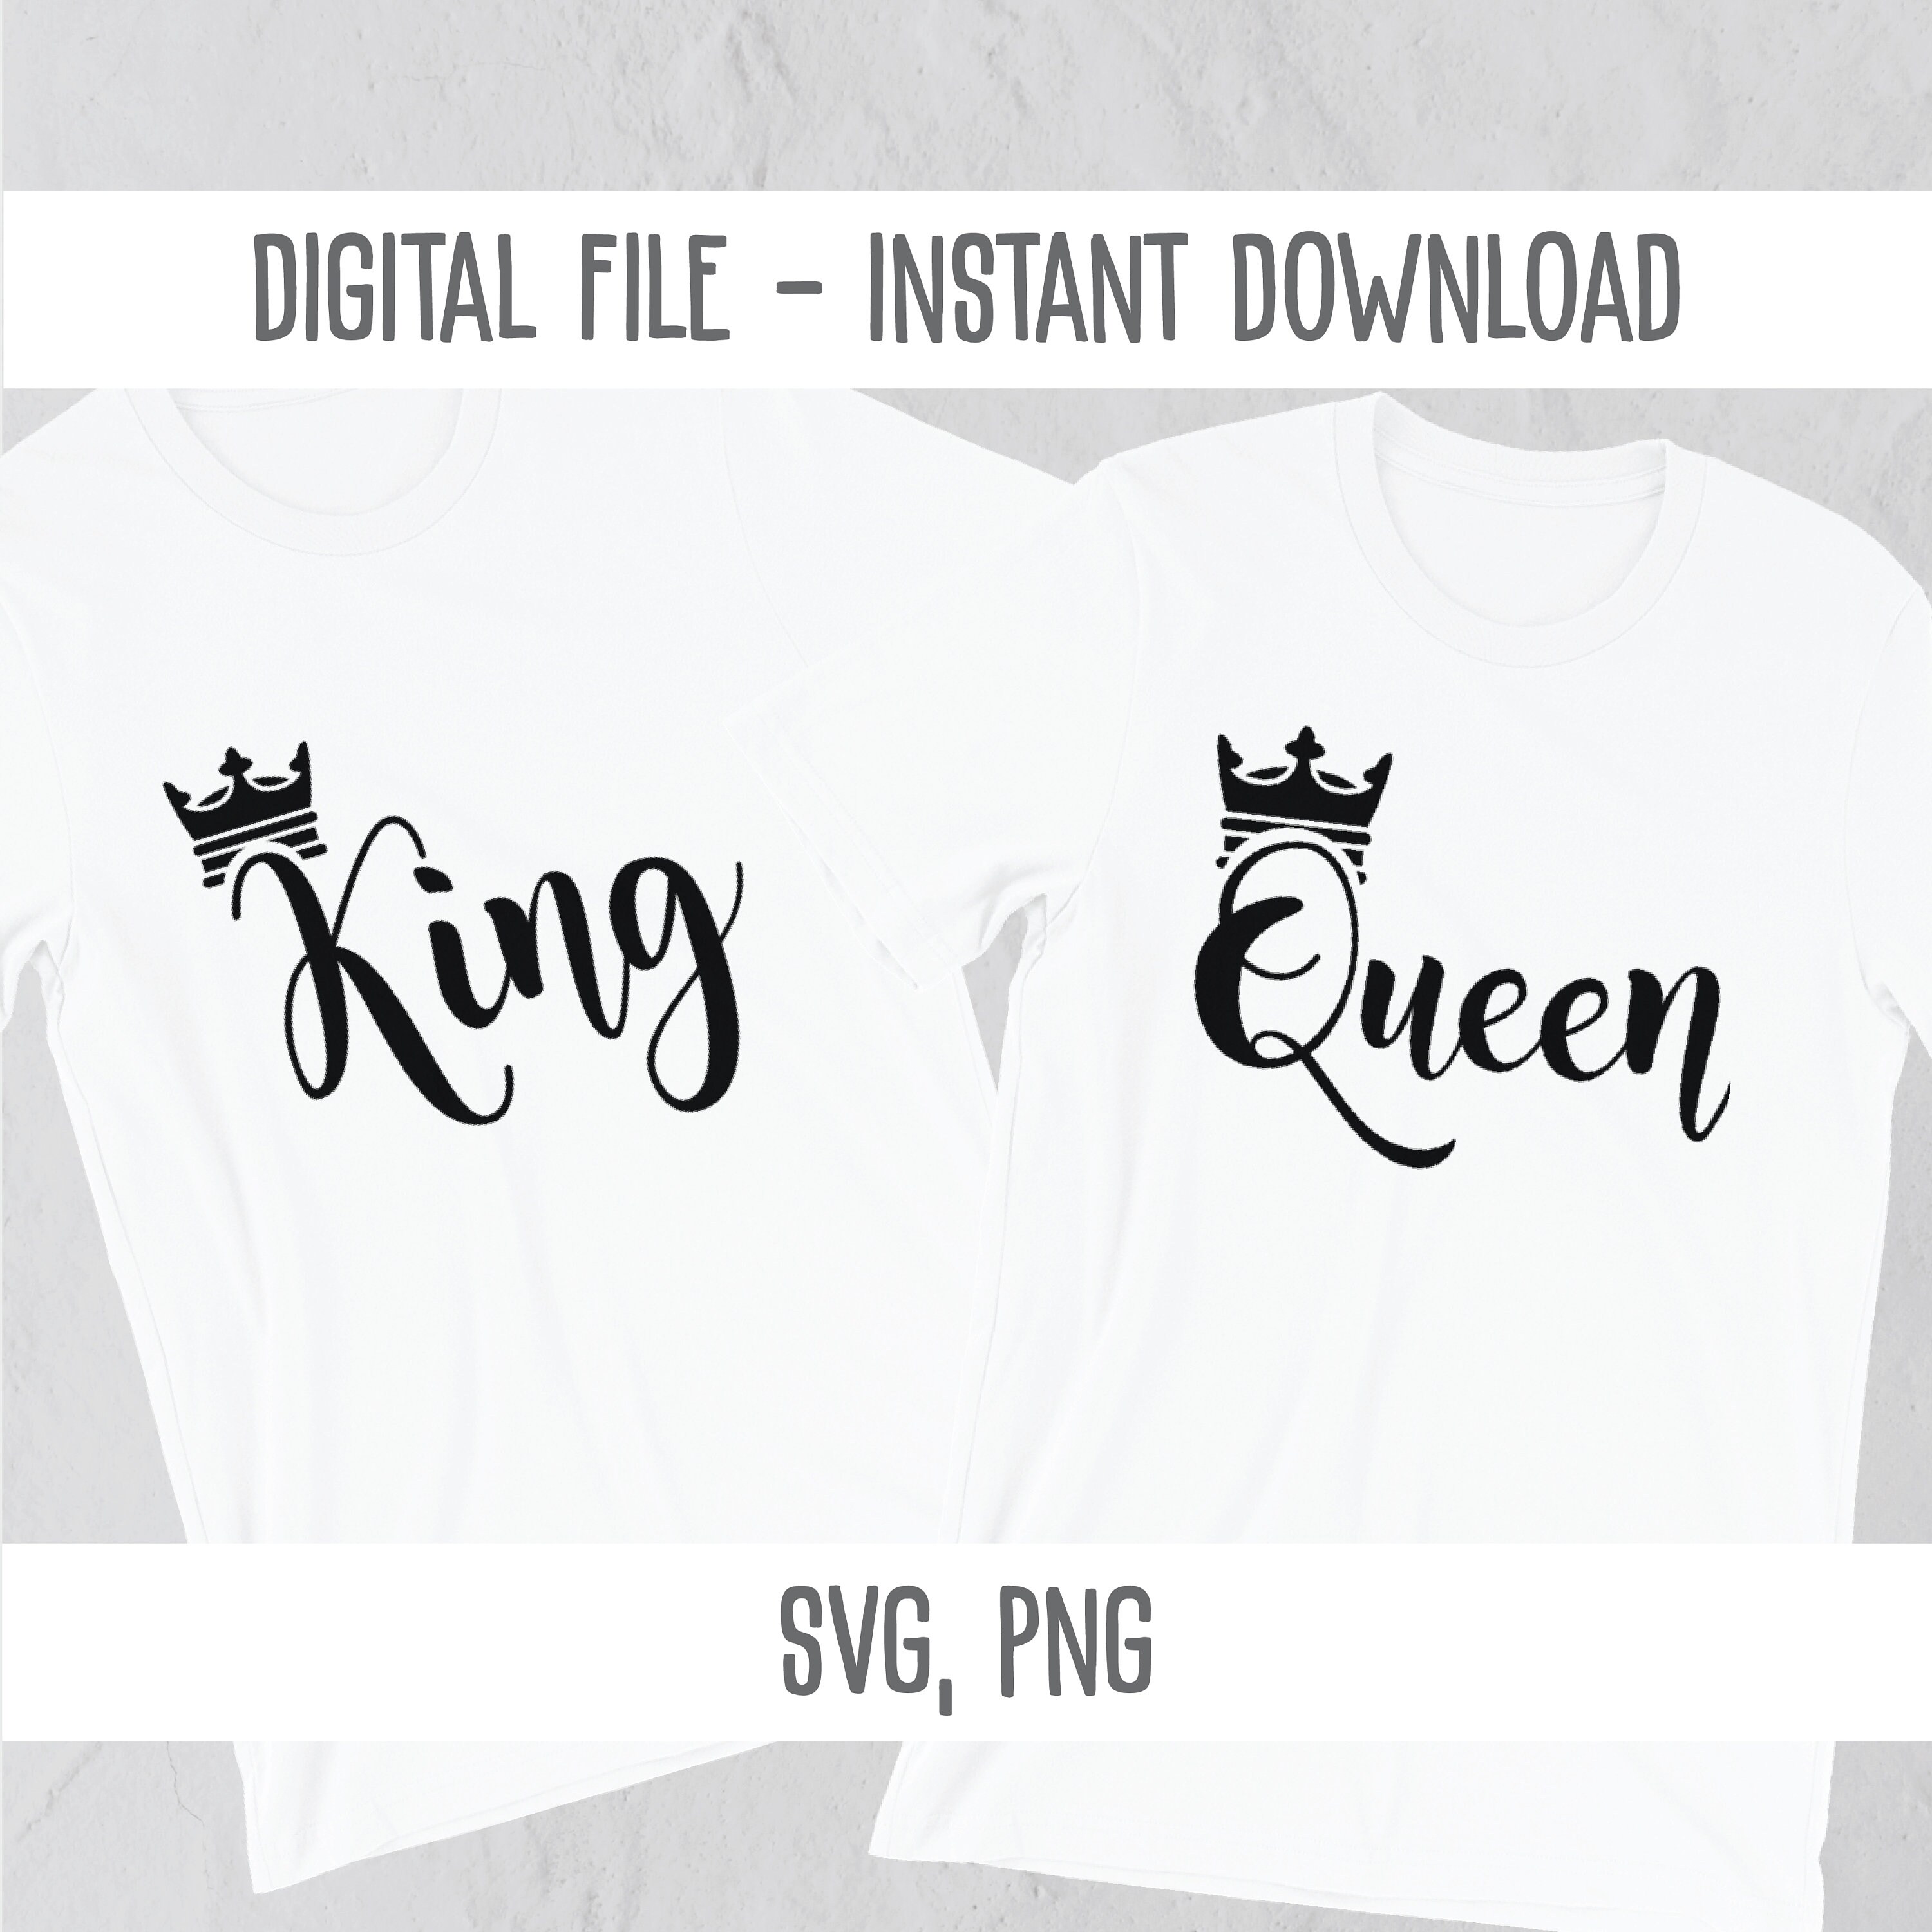 King and queen SVG design for instant download | Etsy